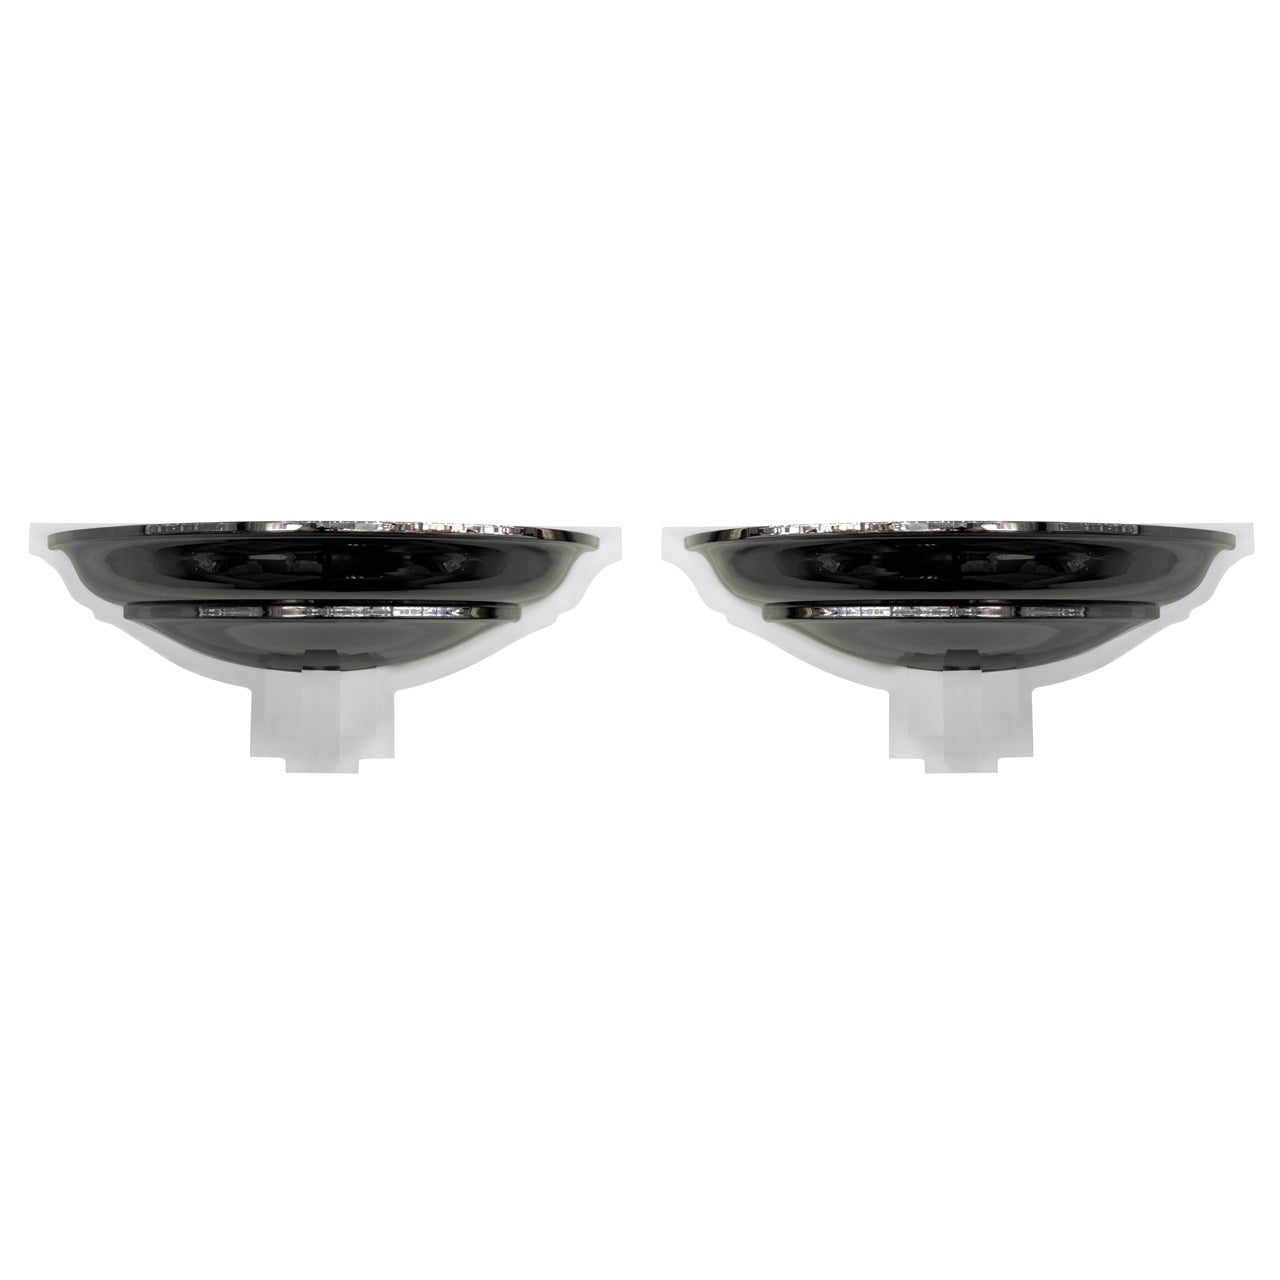 Pair of "Spun Shaped Wall Sconces" by Karl Springer